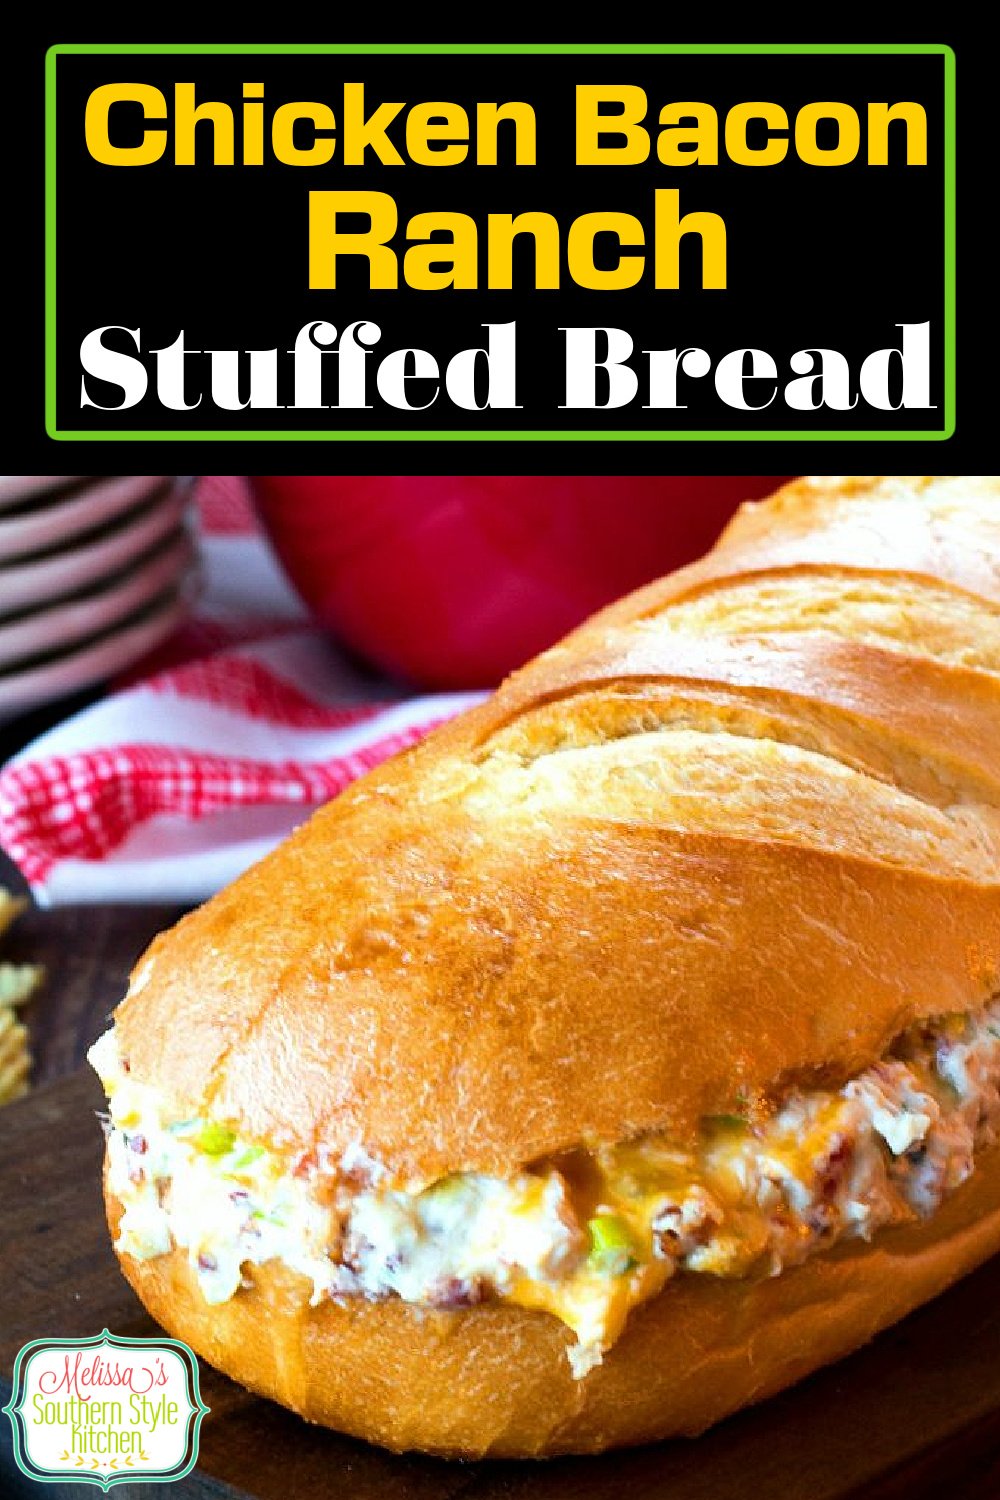 The family will flip for this Chicken Bacon Ranch Stuffed Bread #chickenbaconranch #chickenrecipes #stuffedbread #breadrecipes #dinnerideas #dinner #partyfood #bacon #ranchdressing #sandwich #sub #appetizer #snacks #southernrecipes #southernfood #melissassouthernstylekitchen #easychickenrecipes #rotisseriechicken #ranchdressing #bacon #chickenbaconranch via @melissasssk